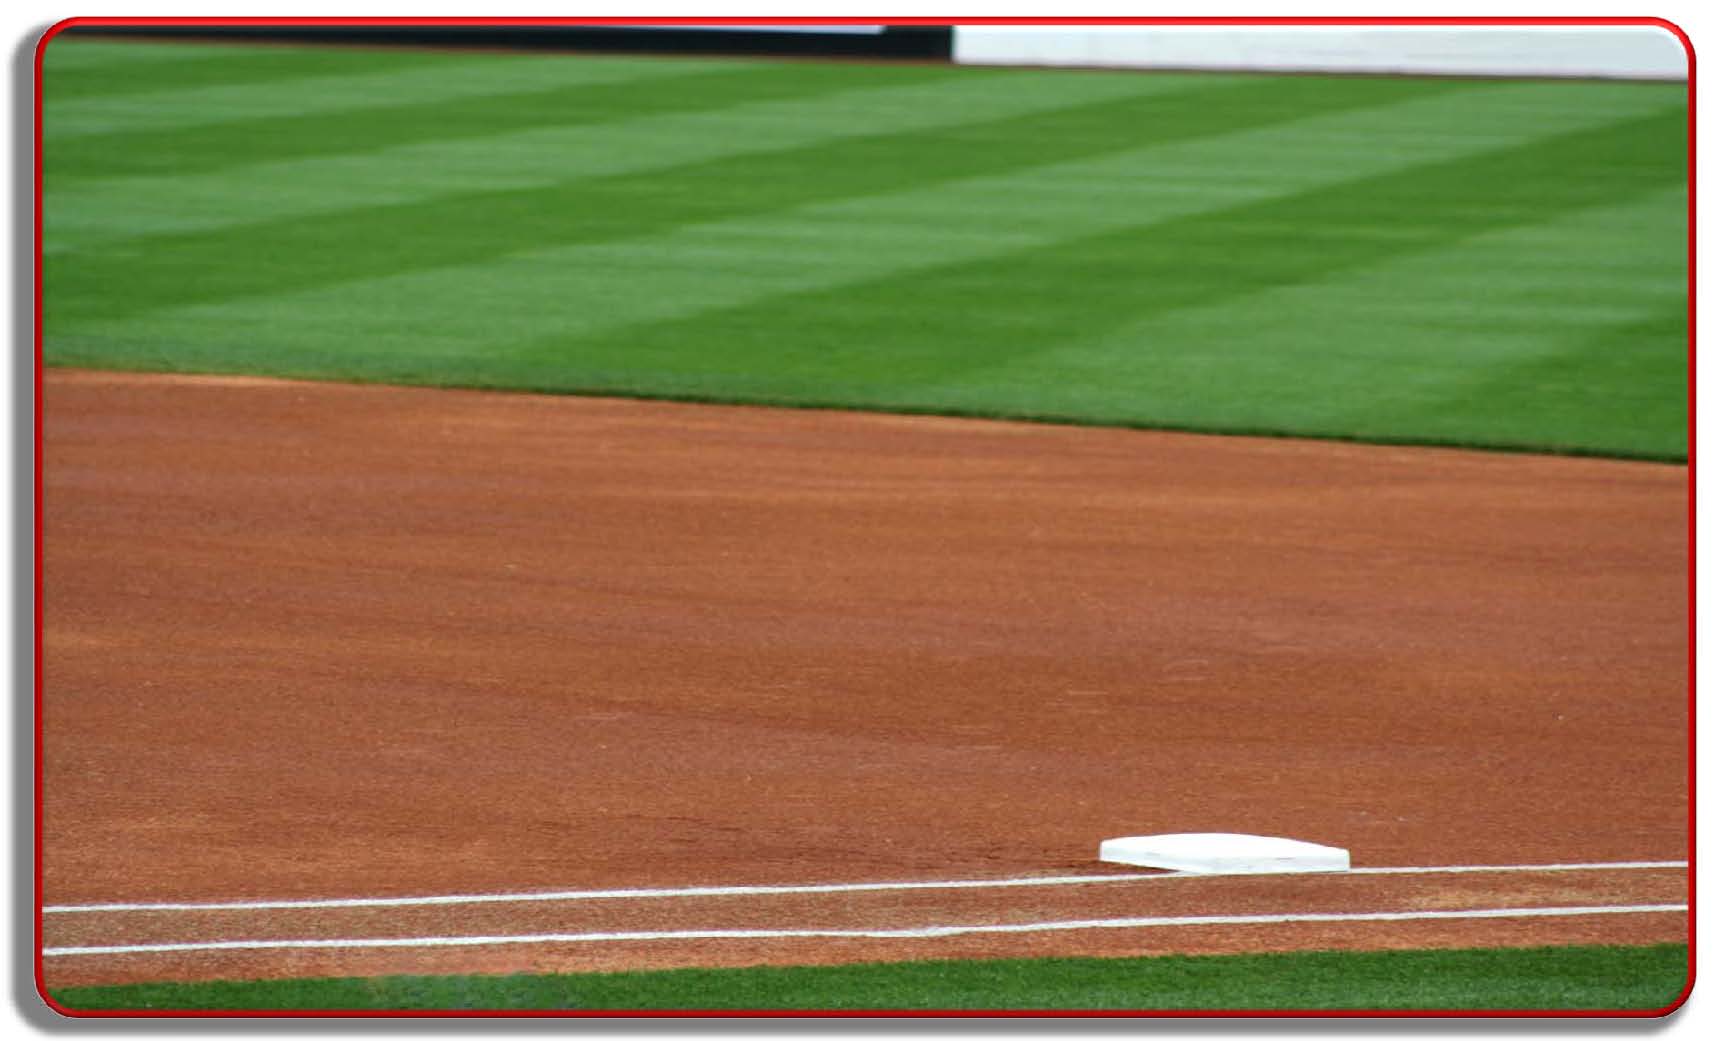 Baseball Field Background Related Keywords Amp Suggestions